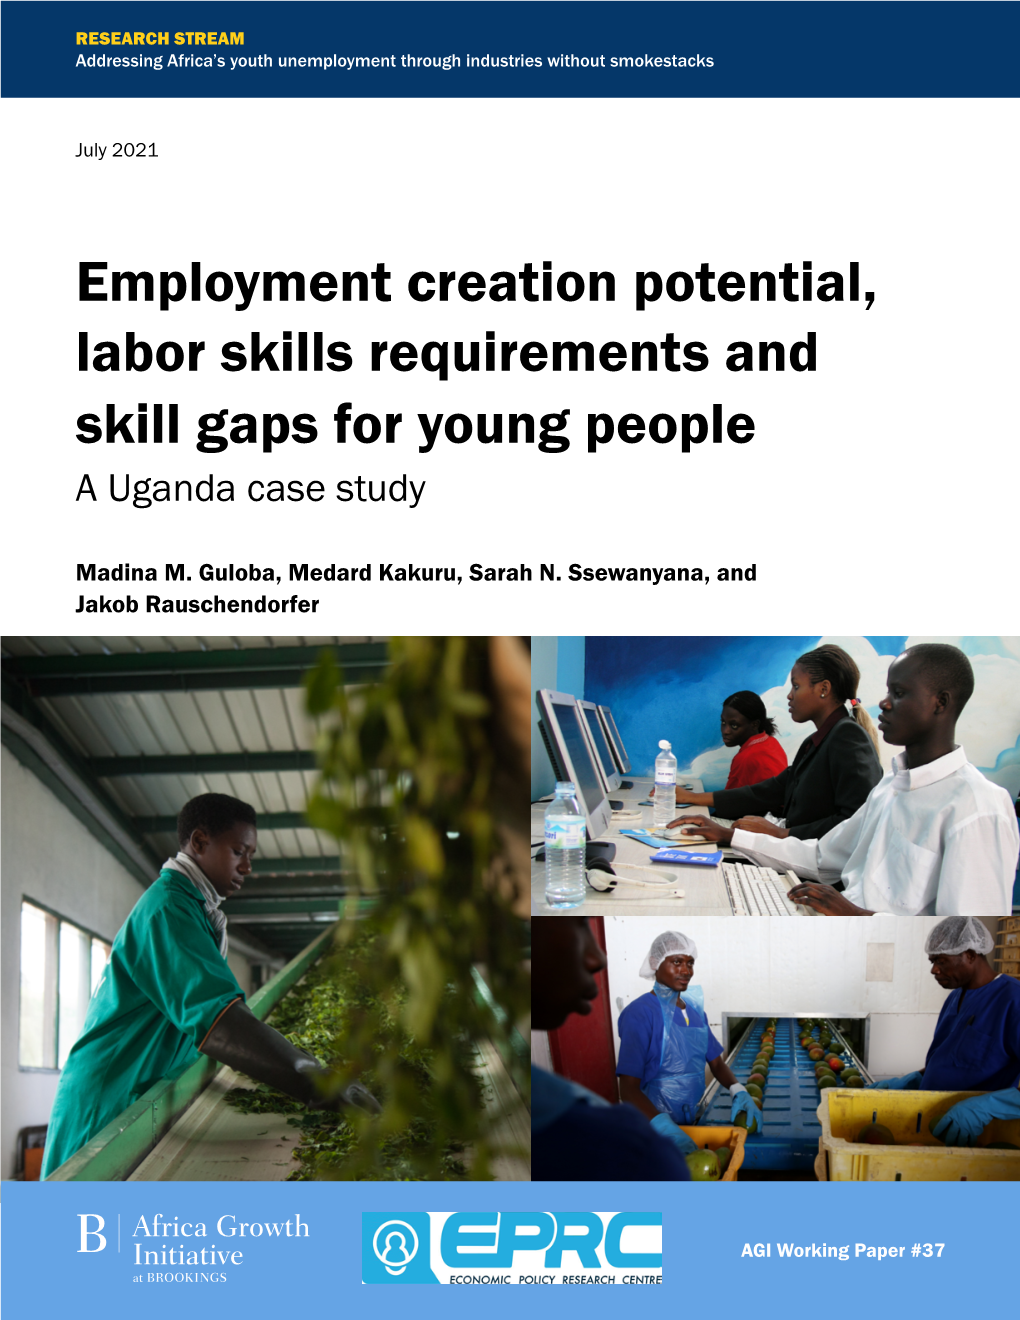 Employment Creation Potential, Labor Skills Requirements and Skill Gaps for Young People a Uganda Case Study